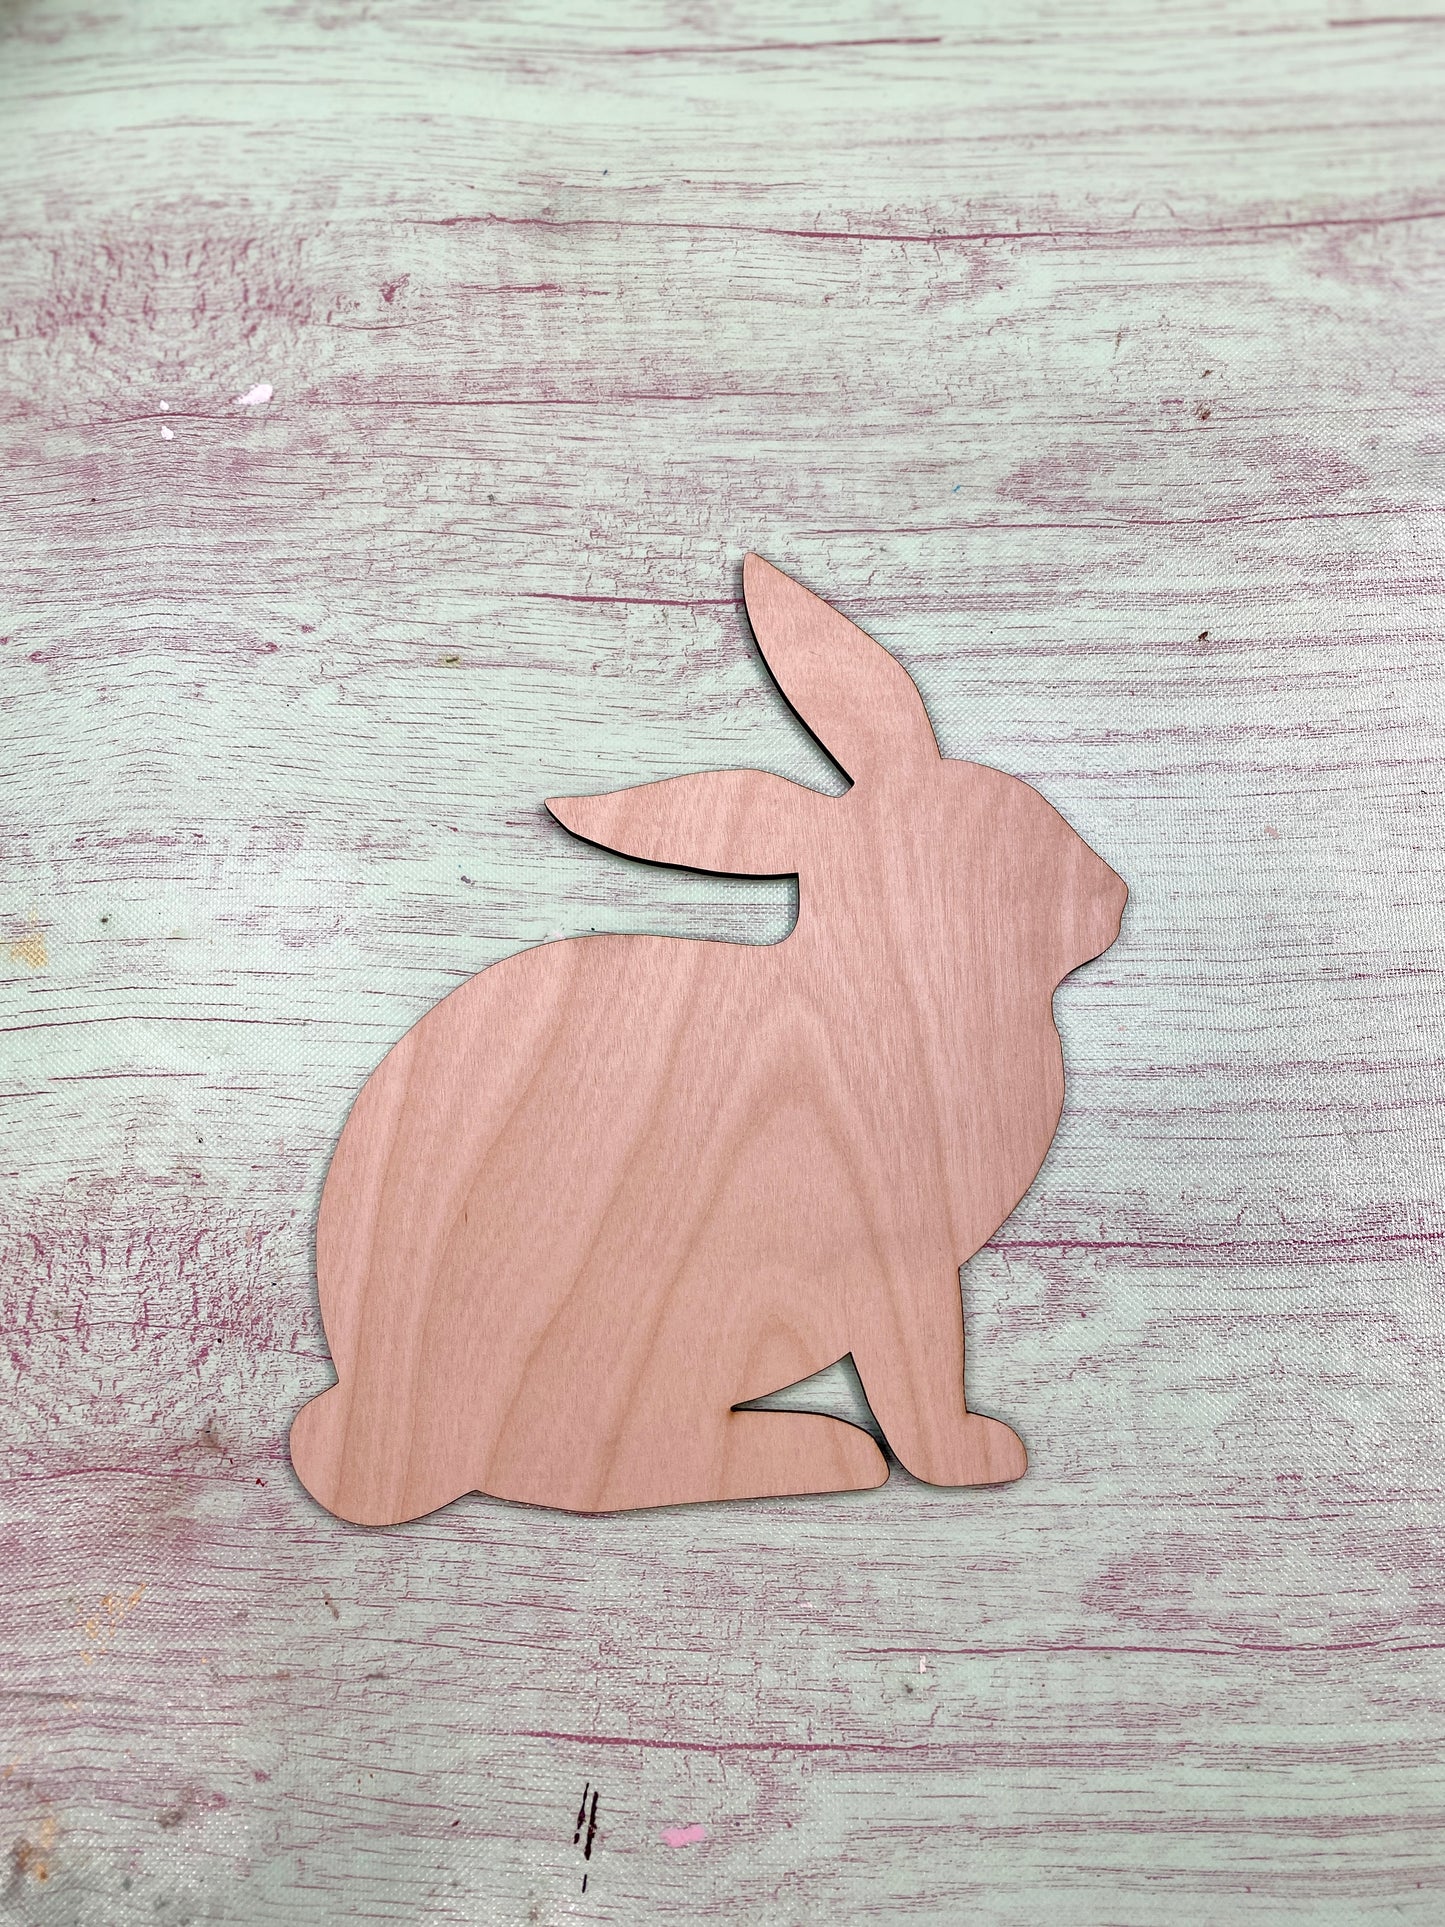 Bunny Silhouette Set 0f 4 Blank DIY Pieces Wooden Blank for DIY Project